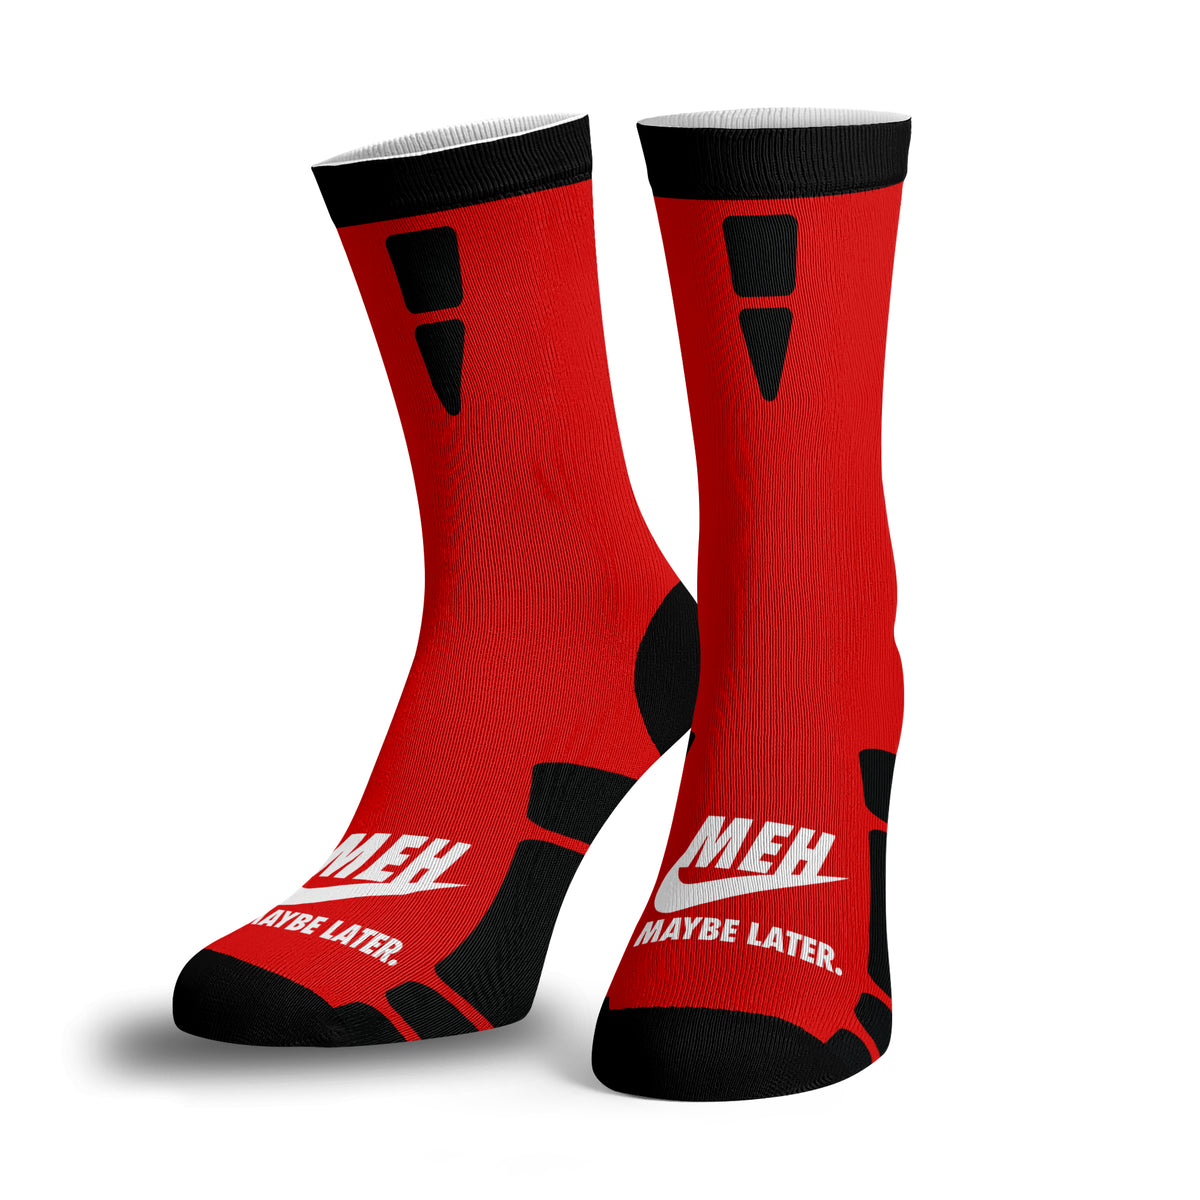 Meh Maybe Later Socks - BustedTees.com